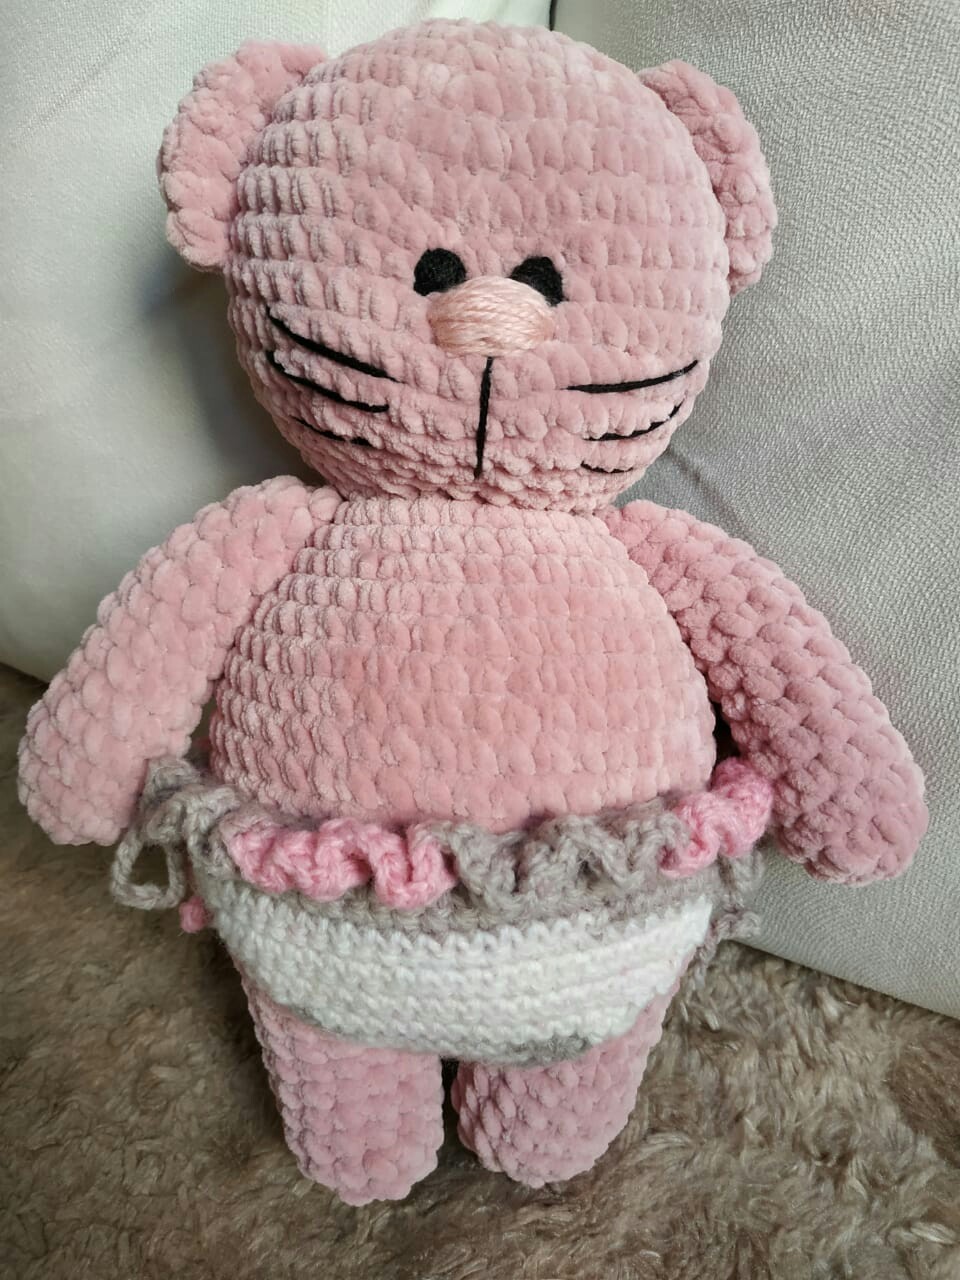 Some plush cuteness - My, Knitting, Crochet, Knitted toys, Needlework, Needlework without process, With your own hands, Amigurumi, Hobby, Longpost